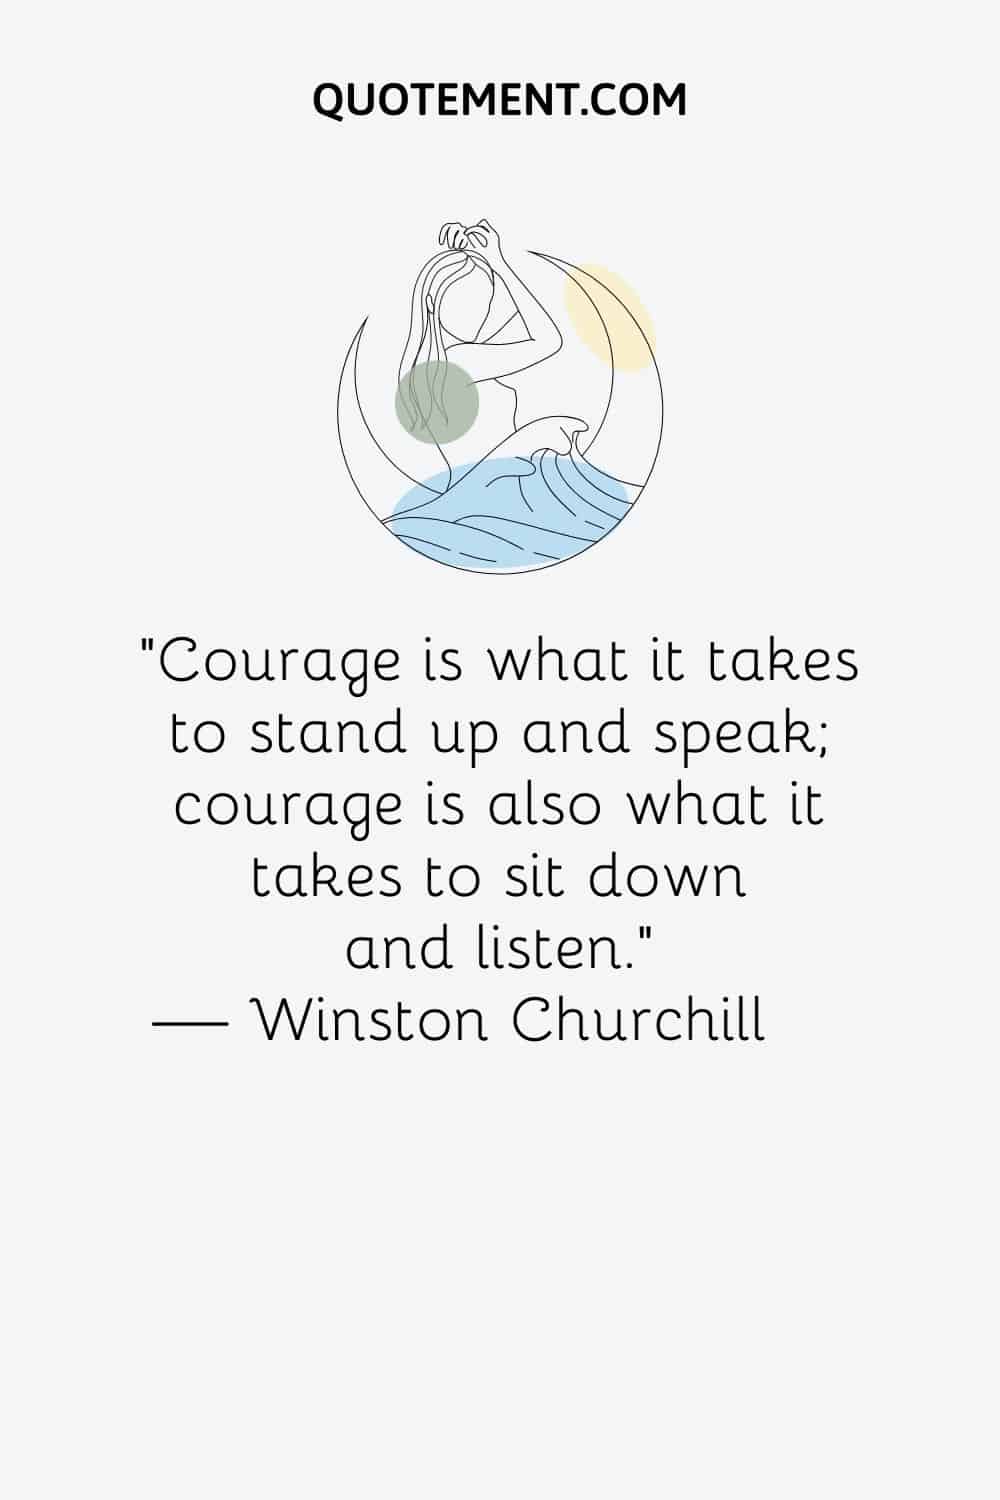 “Courage is what it takes to stand up and speak; courage is also what it takes to sit down and listen.” ― Winston Churchill